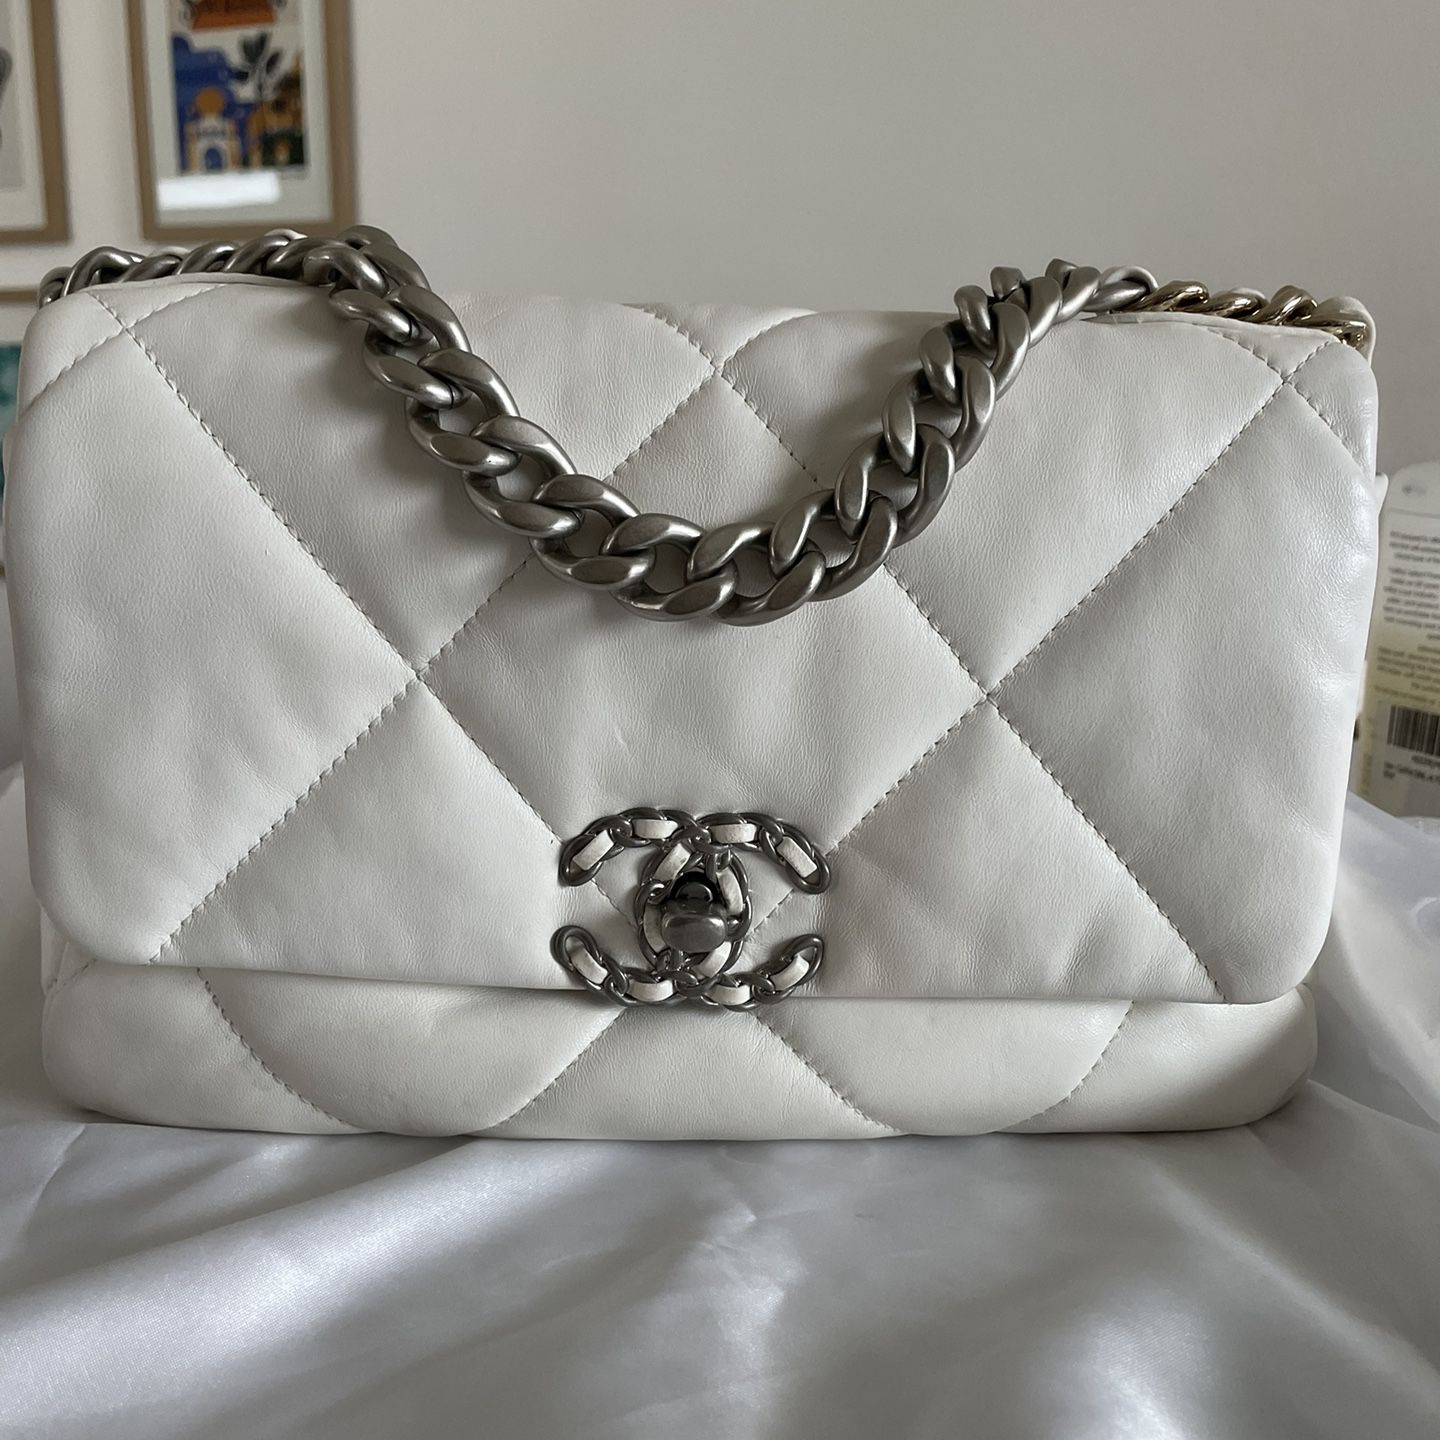 CHANEL LED BOY BAG for Sale in Los Angeles, CA - OfferUp